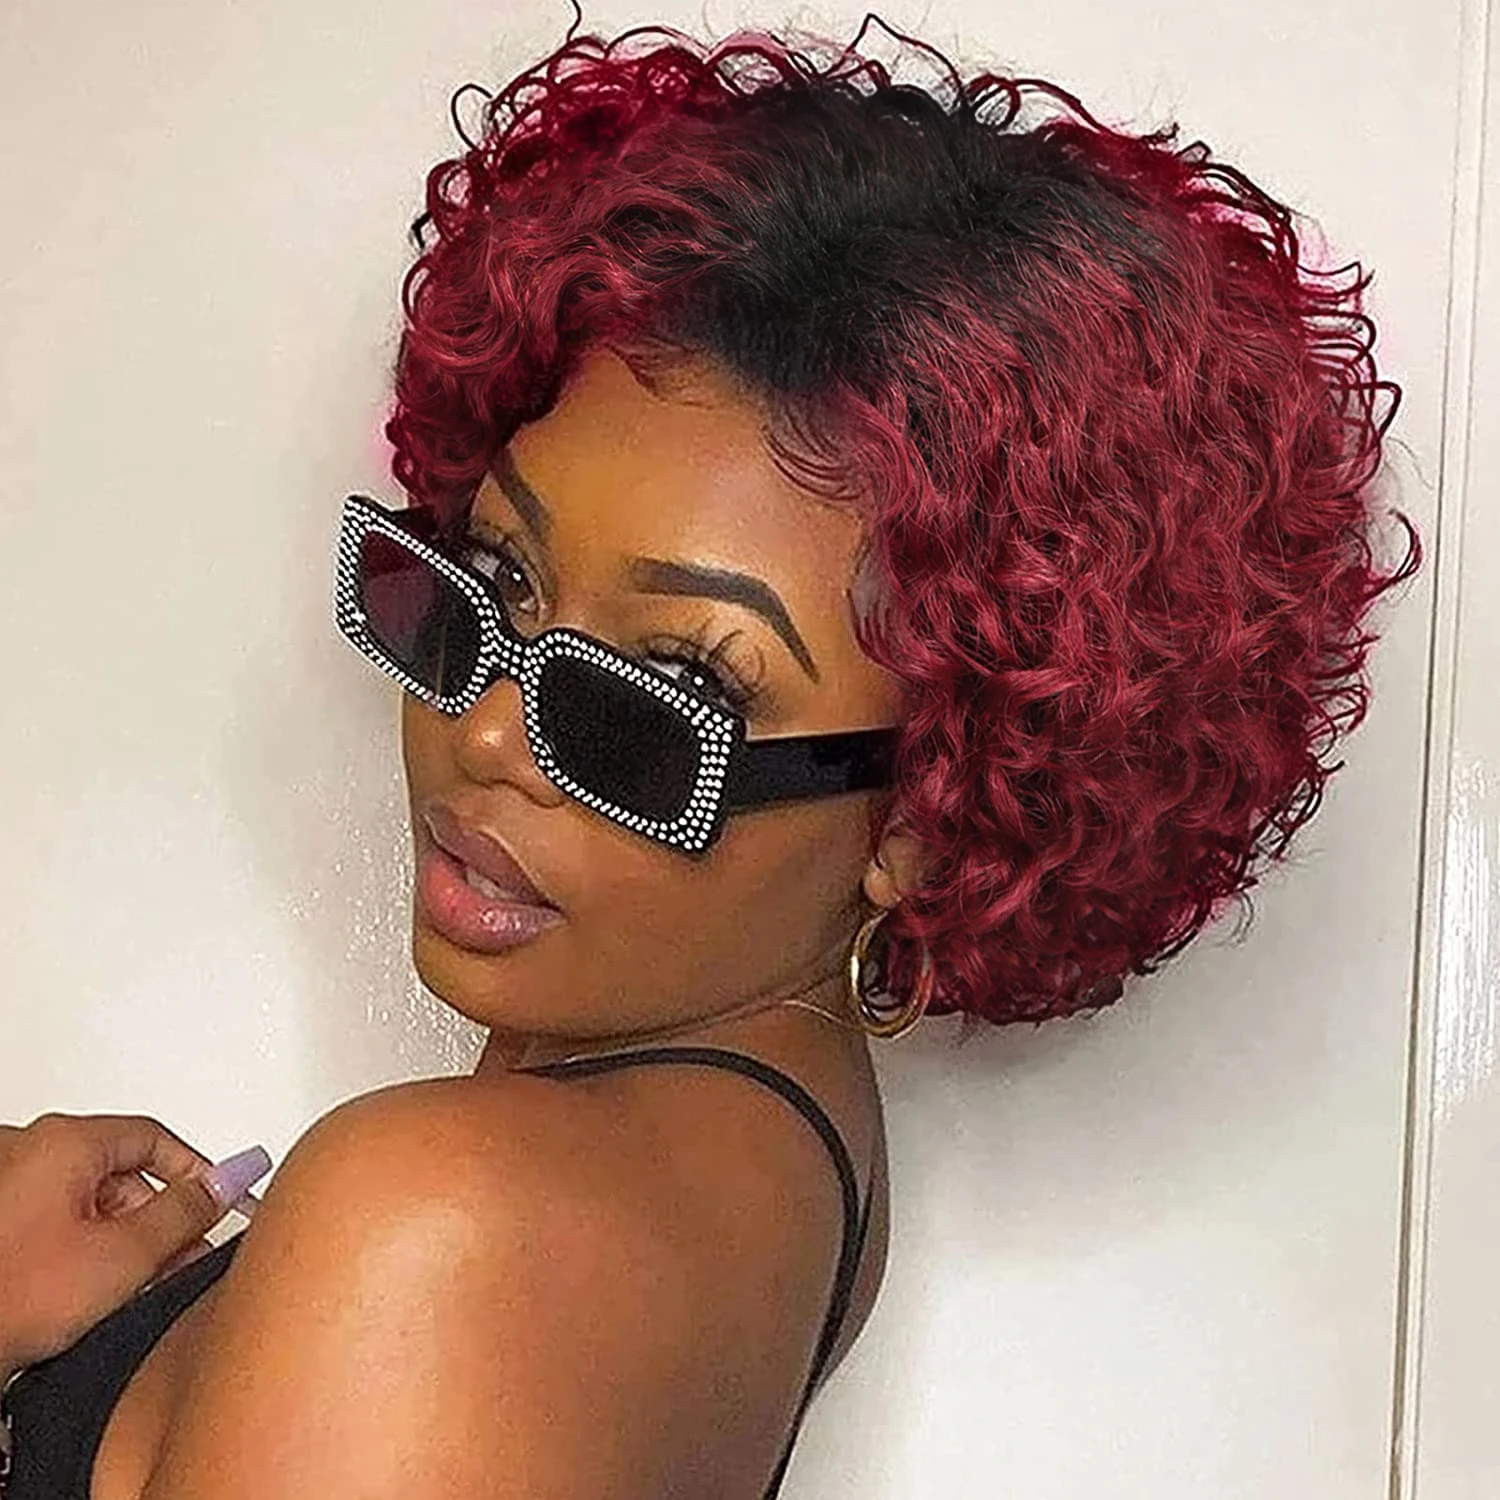 fave-short-curly-human-hair-wigs-for-women-afro-curly-pixie-cut-wig-human-hair-burgundy-remy-hair-full-machine-made-wigs-on-sale